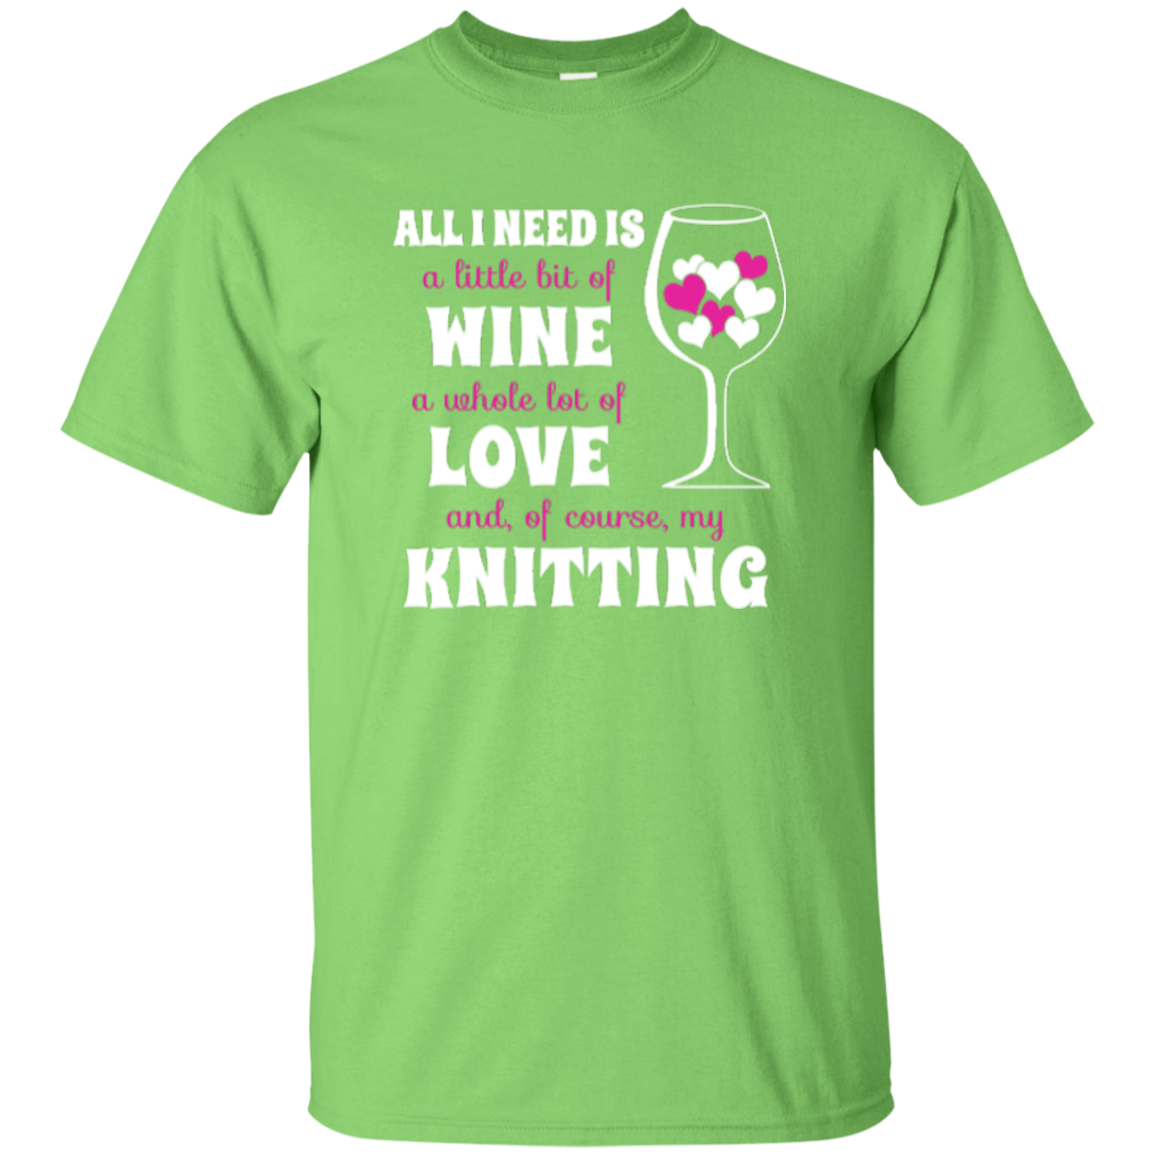 All I Need is Wine-Love-Knitting Custom Ultra Cotton T-Shirt - Crafter4Life - 7